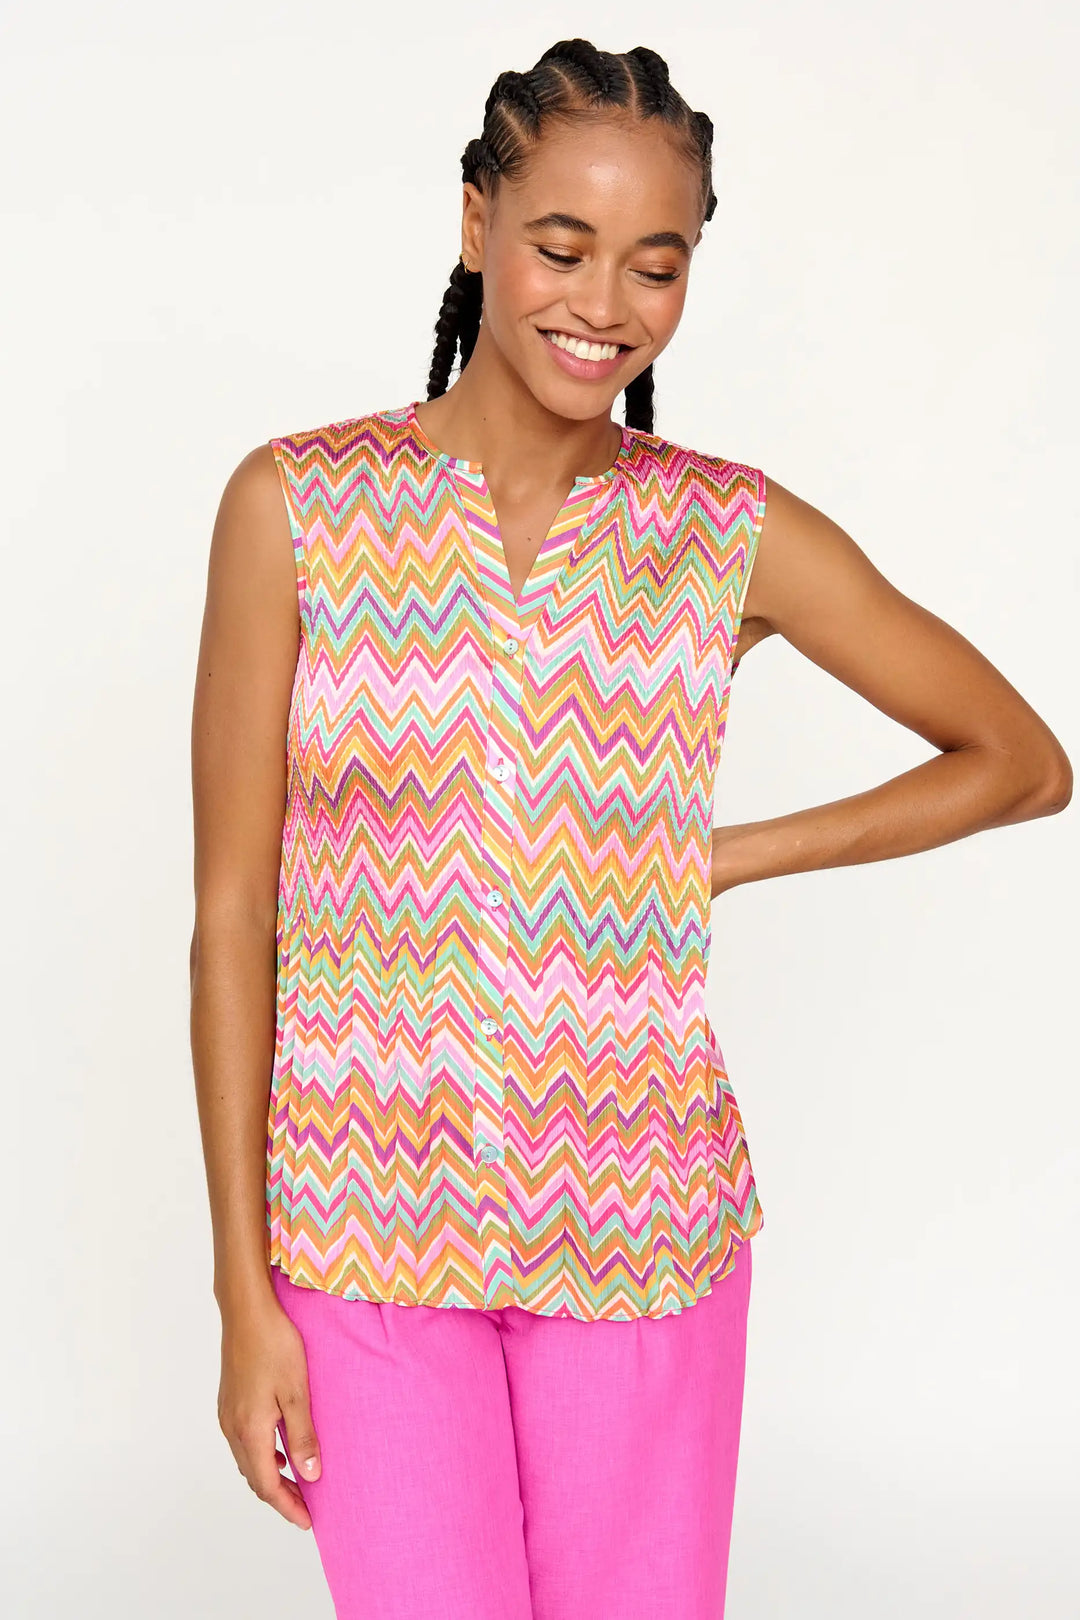 A model with a cheerful demeanor wearing the 'Ambrosia' style sleeveless blouse, featuring a bright, multicolored zigzag pattern, with a collar and front button placket, paired with vibrant pink trousers.